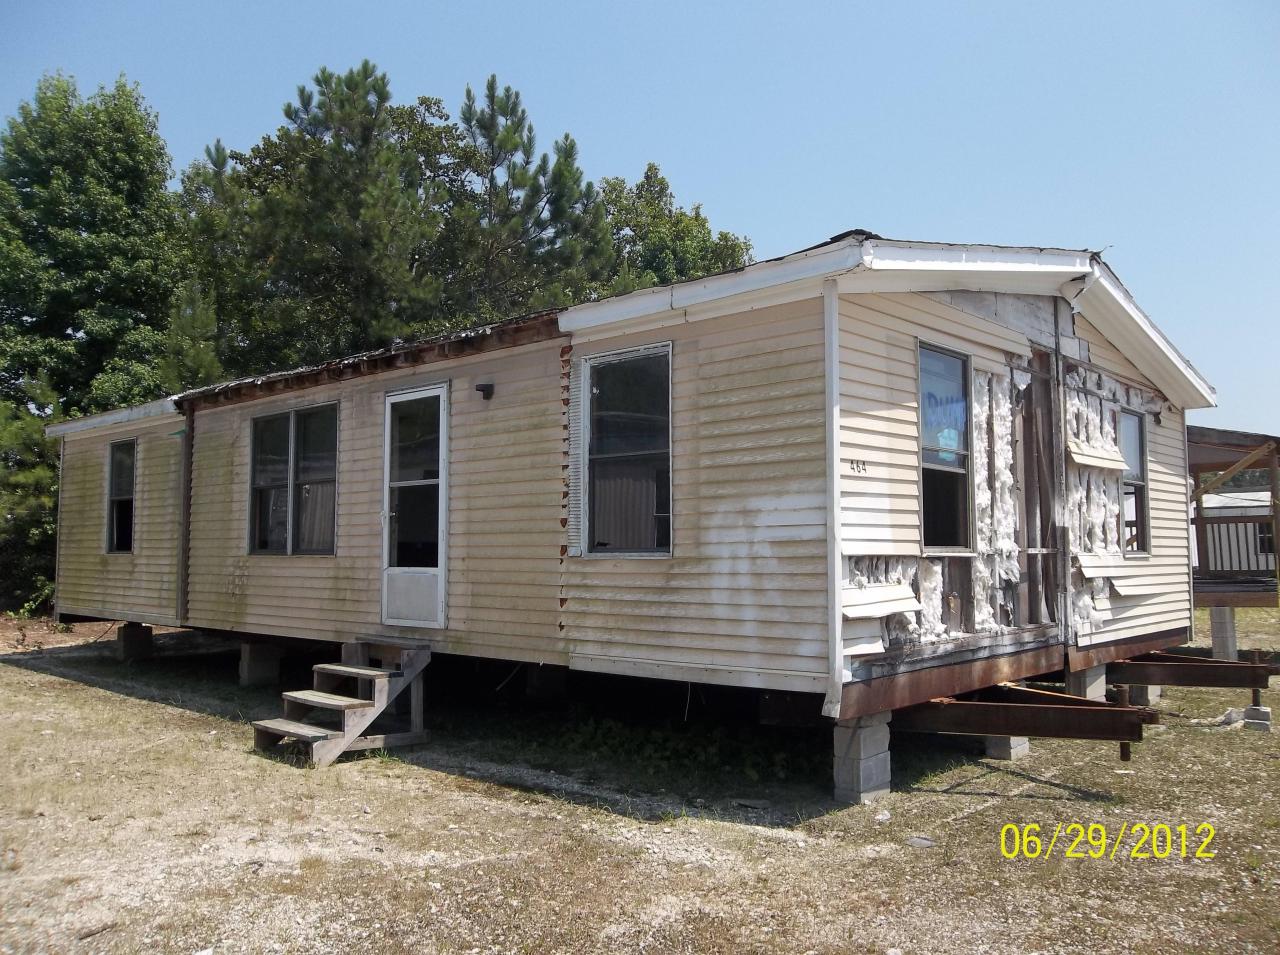 Mobile homes for sale in Roscommon, Michigan